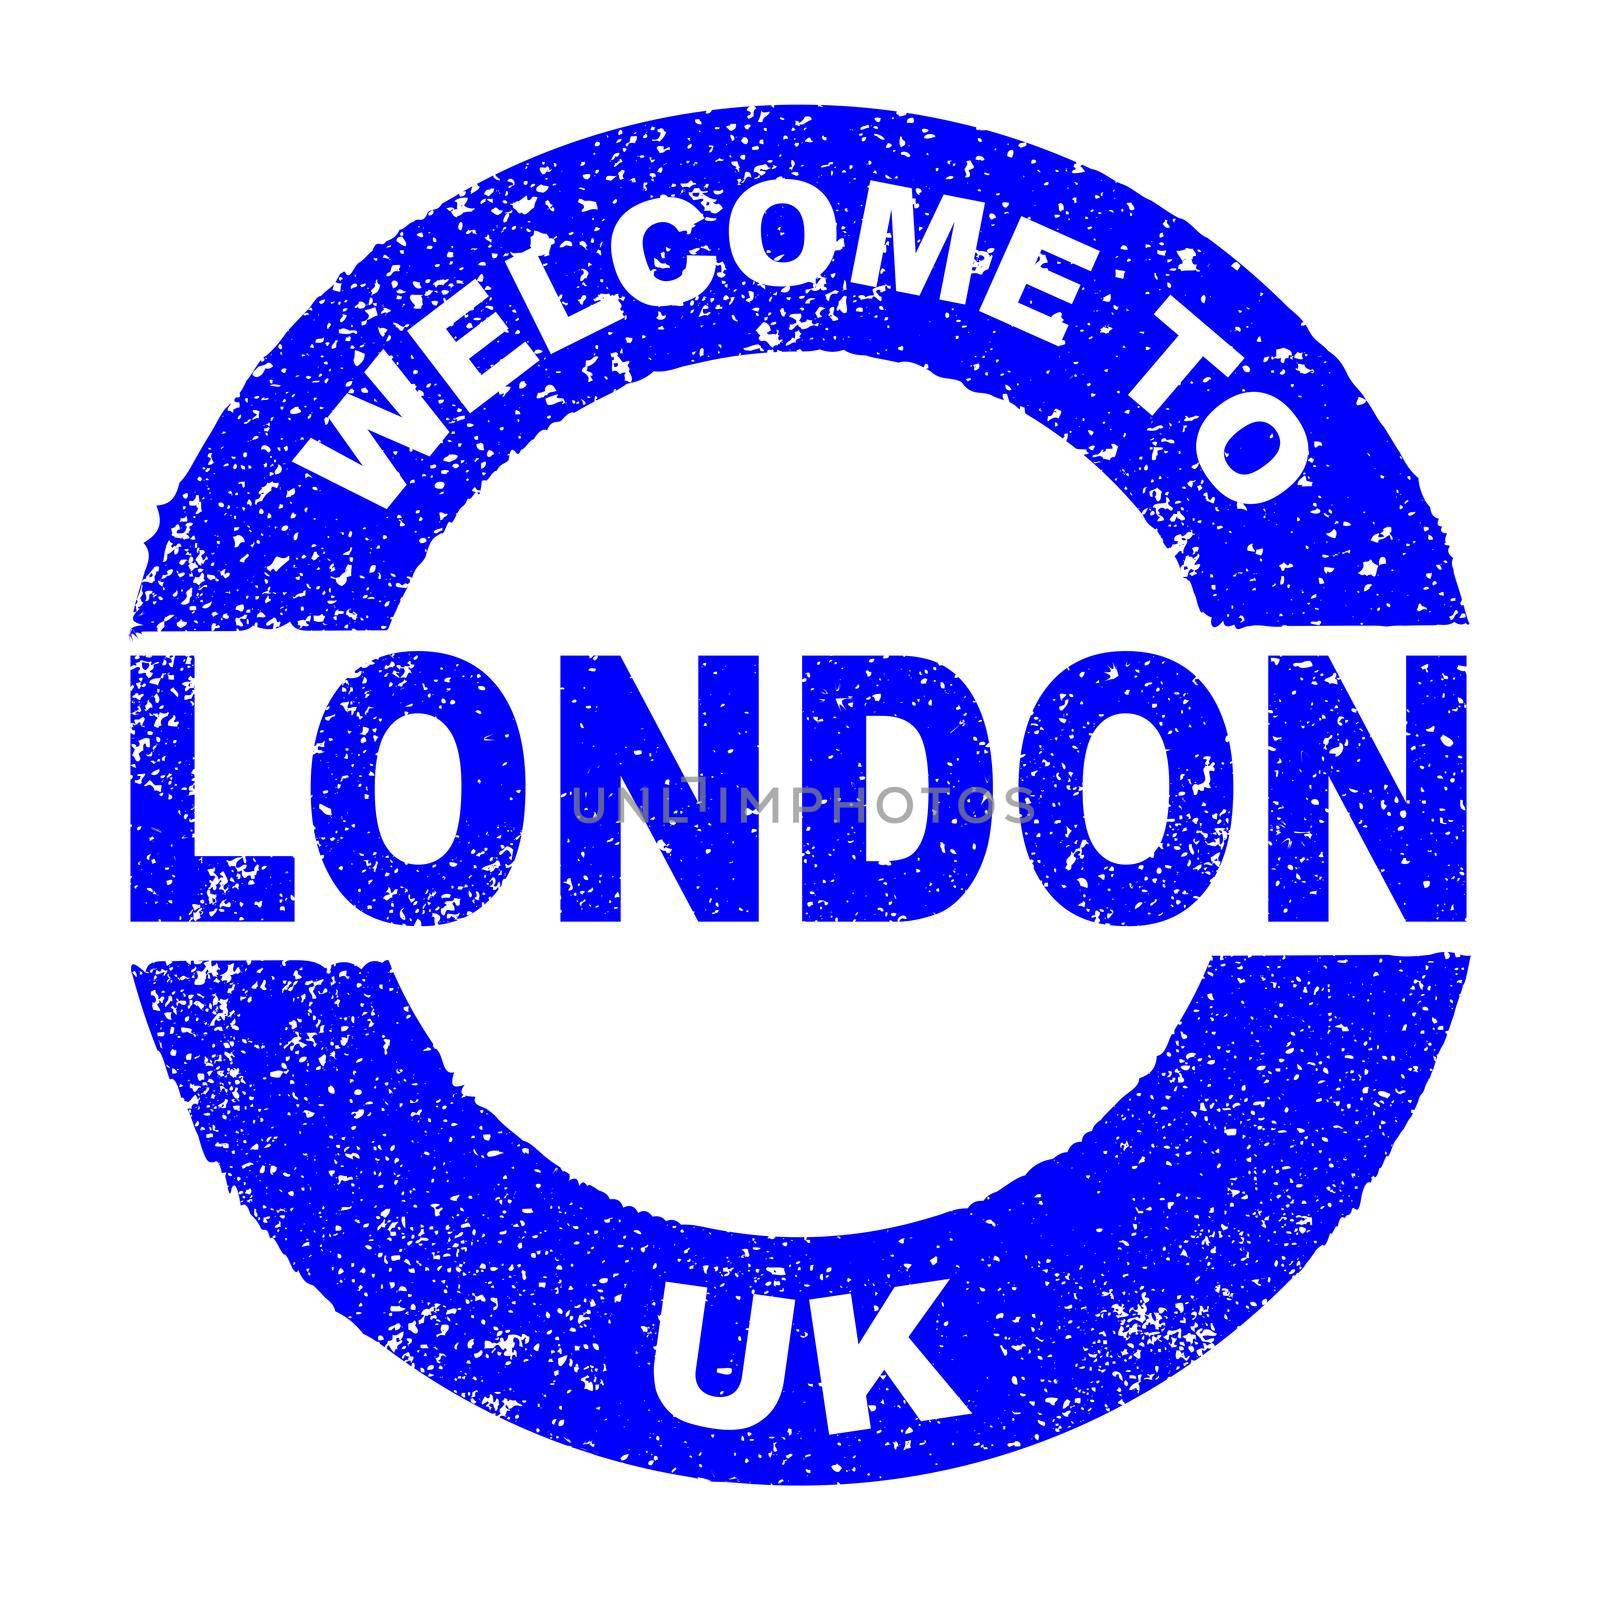 A grunge rubber ink stamp with the text Welcome To London UK over a white background